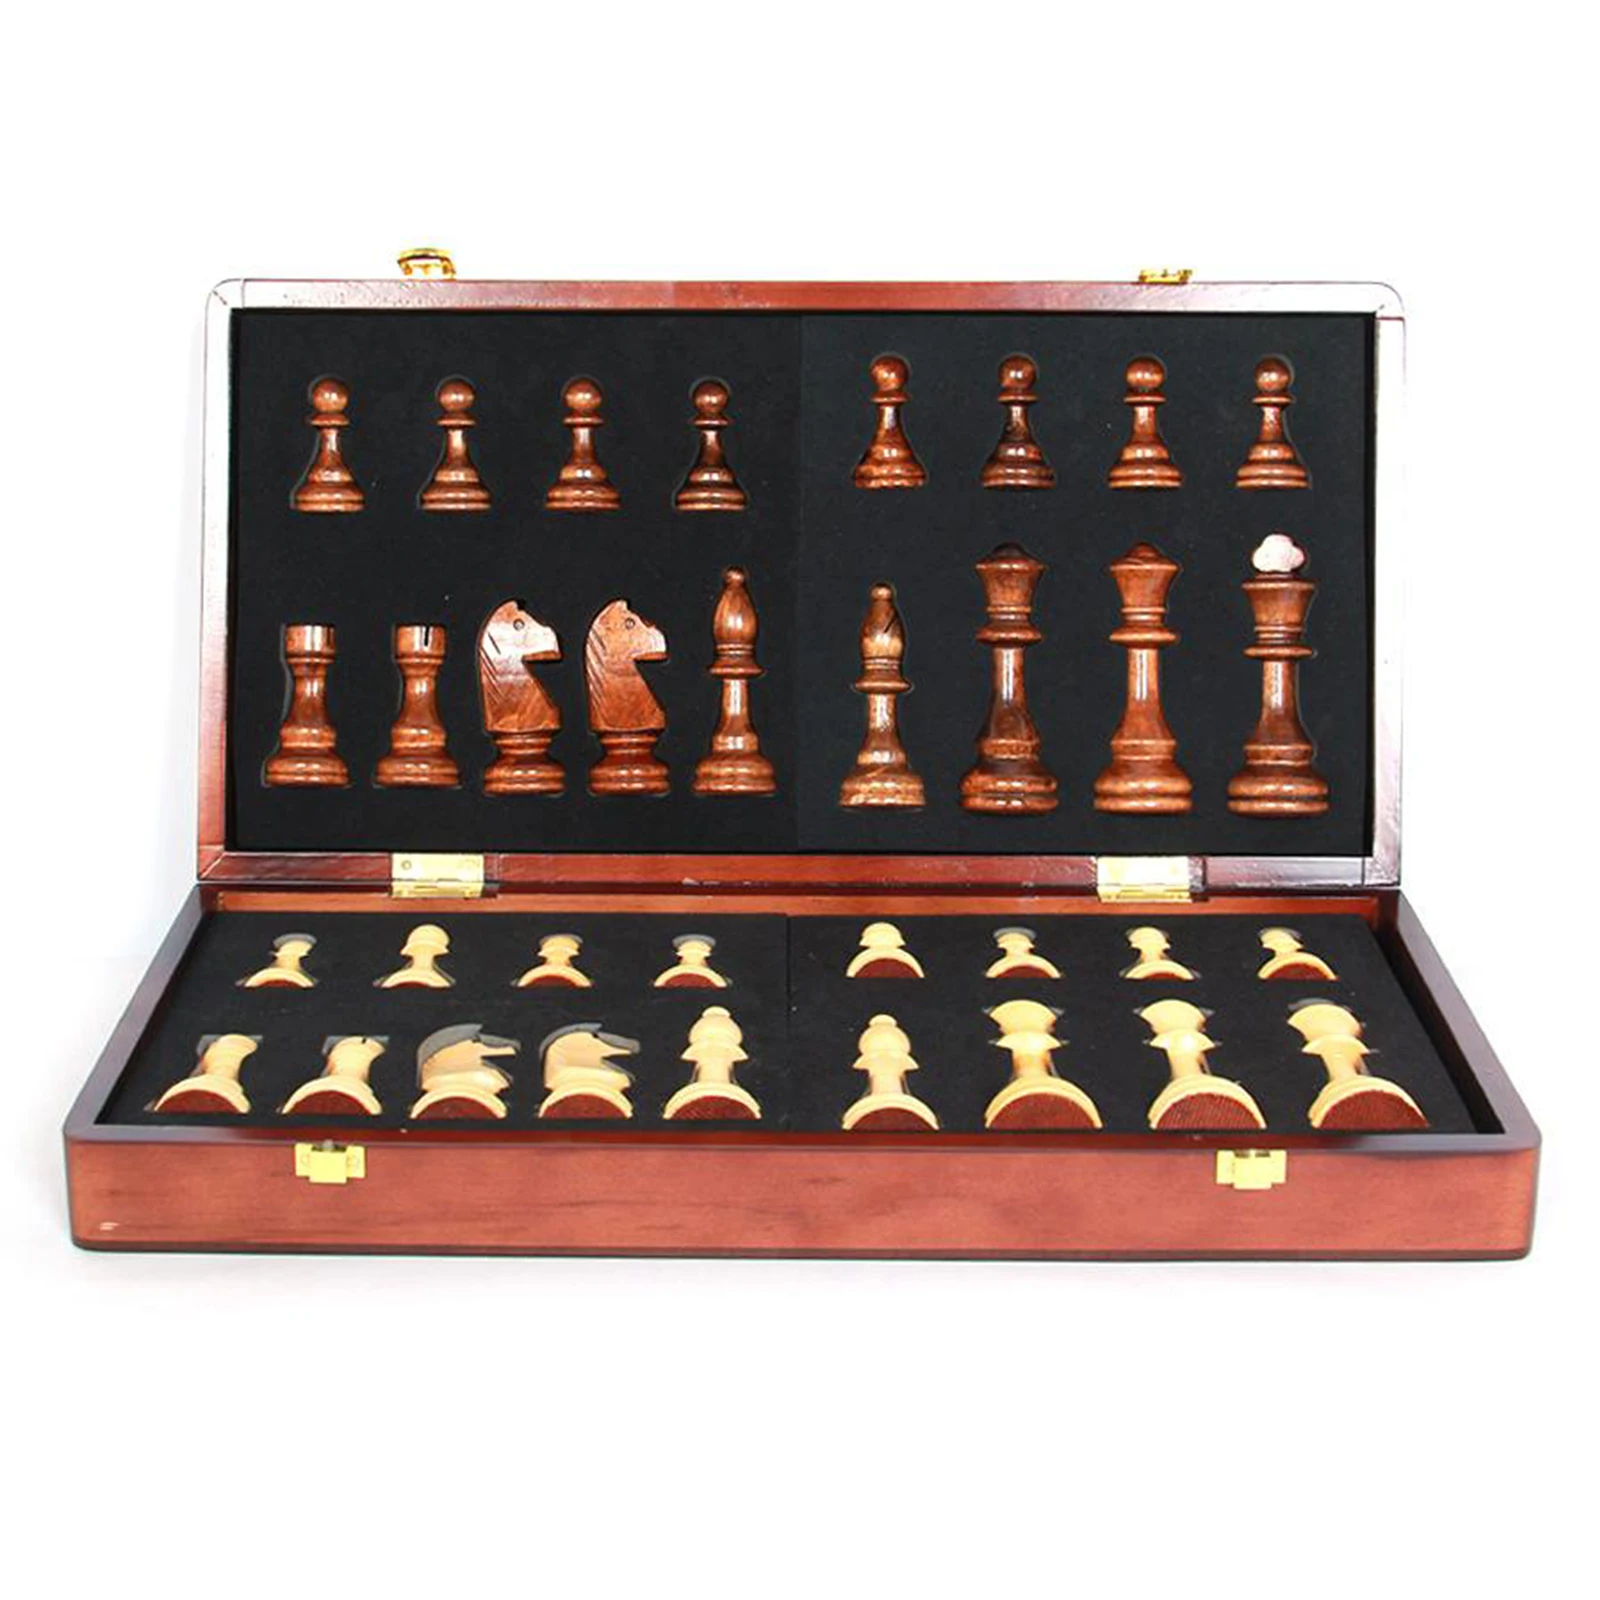 Rosewood International Chess Wooden Chess Set Full Size Folding Chessboard Professional Competitive Tournament Chessboard